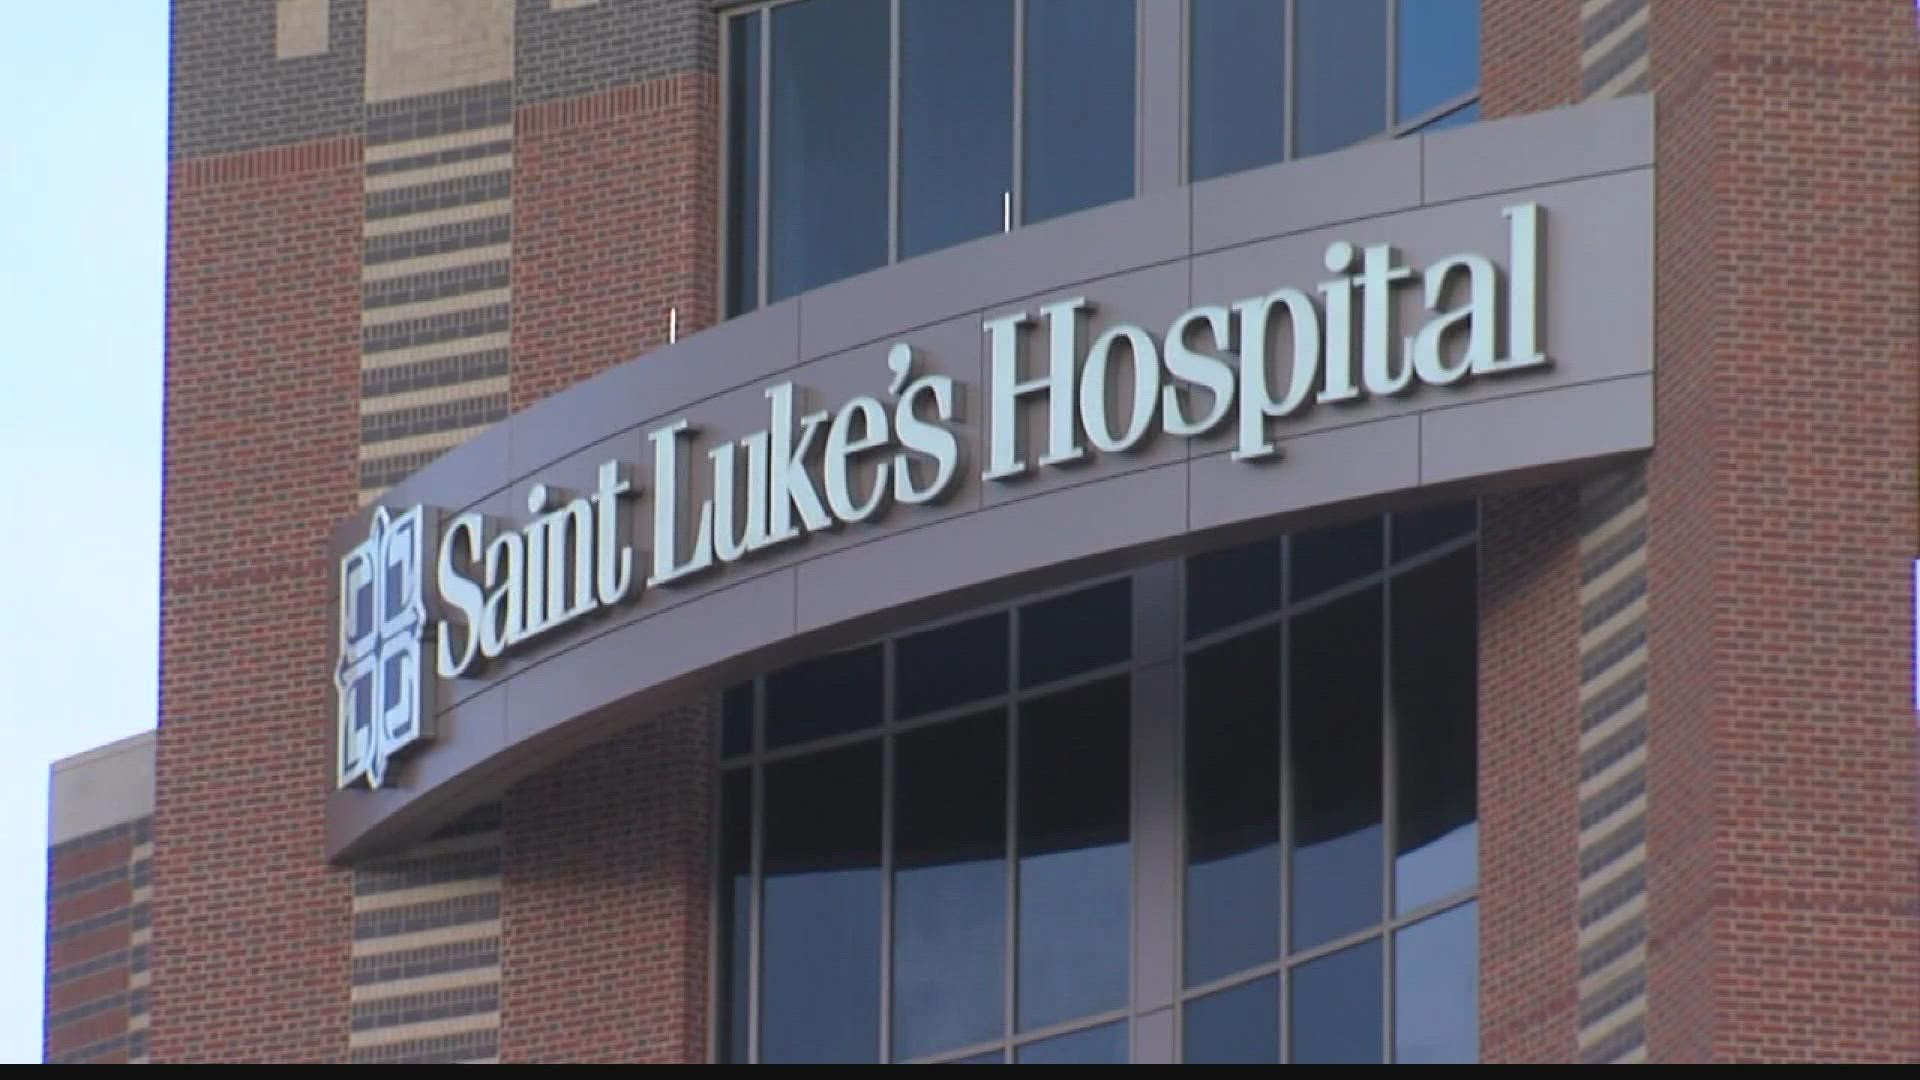 Within the past 90 minutes, Saint Luke's Hospital in the Kansas City area reversed course saying it will provide Plan B to its patients.